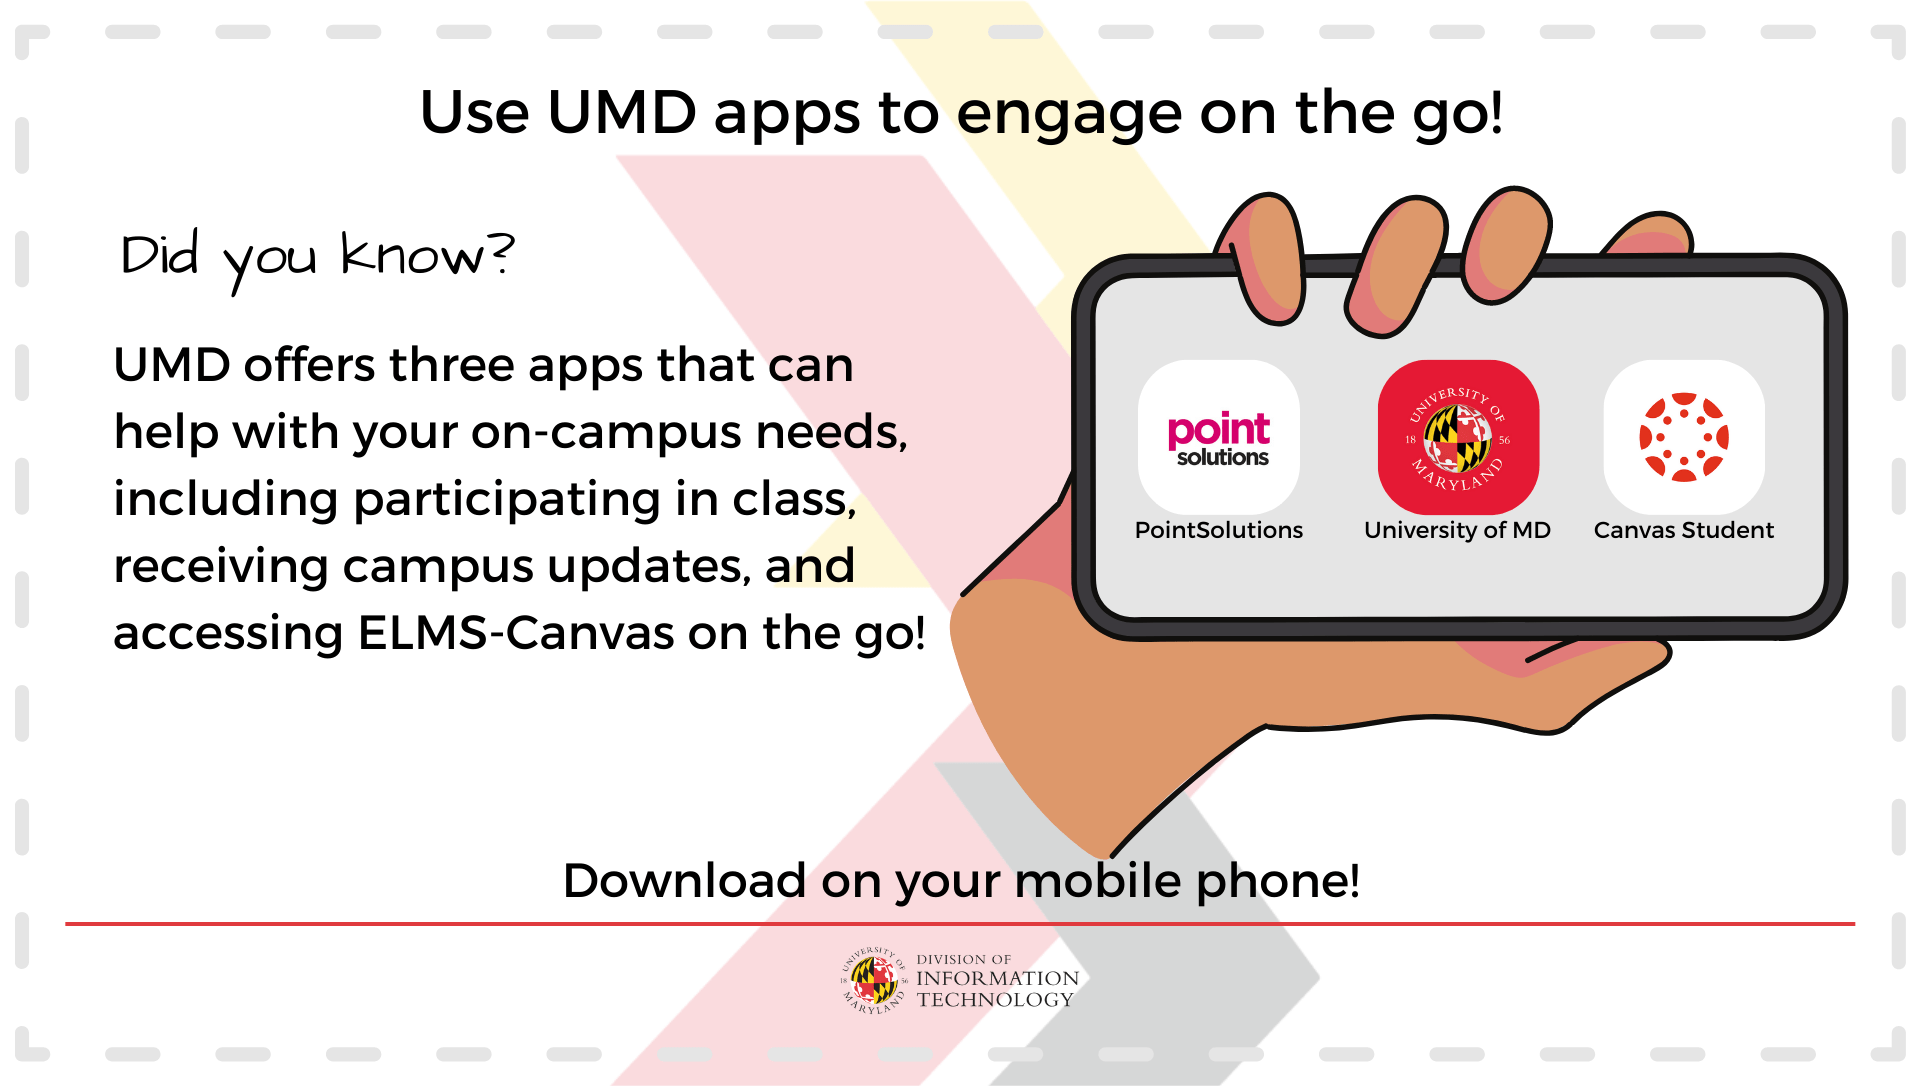 Use UMD apps to engage on the go! Did you know? UMD offers three apps that can help with your on-campus needs, including participating in class, receiving campus updates, and accessing ELMS-Canvas on the go! Download on your mobiel phone!